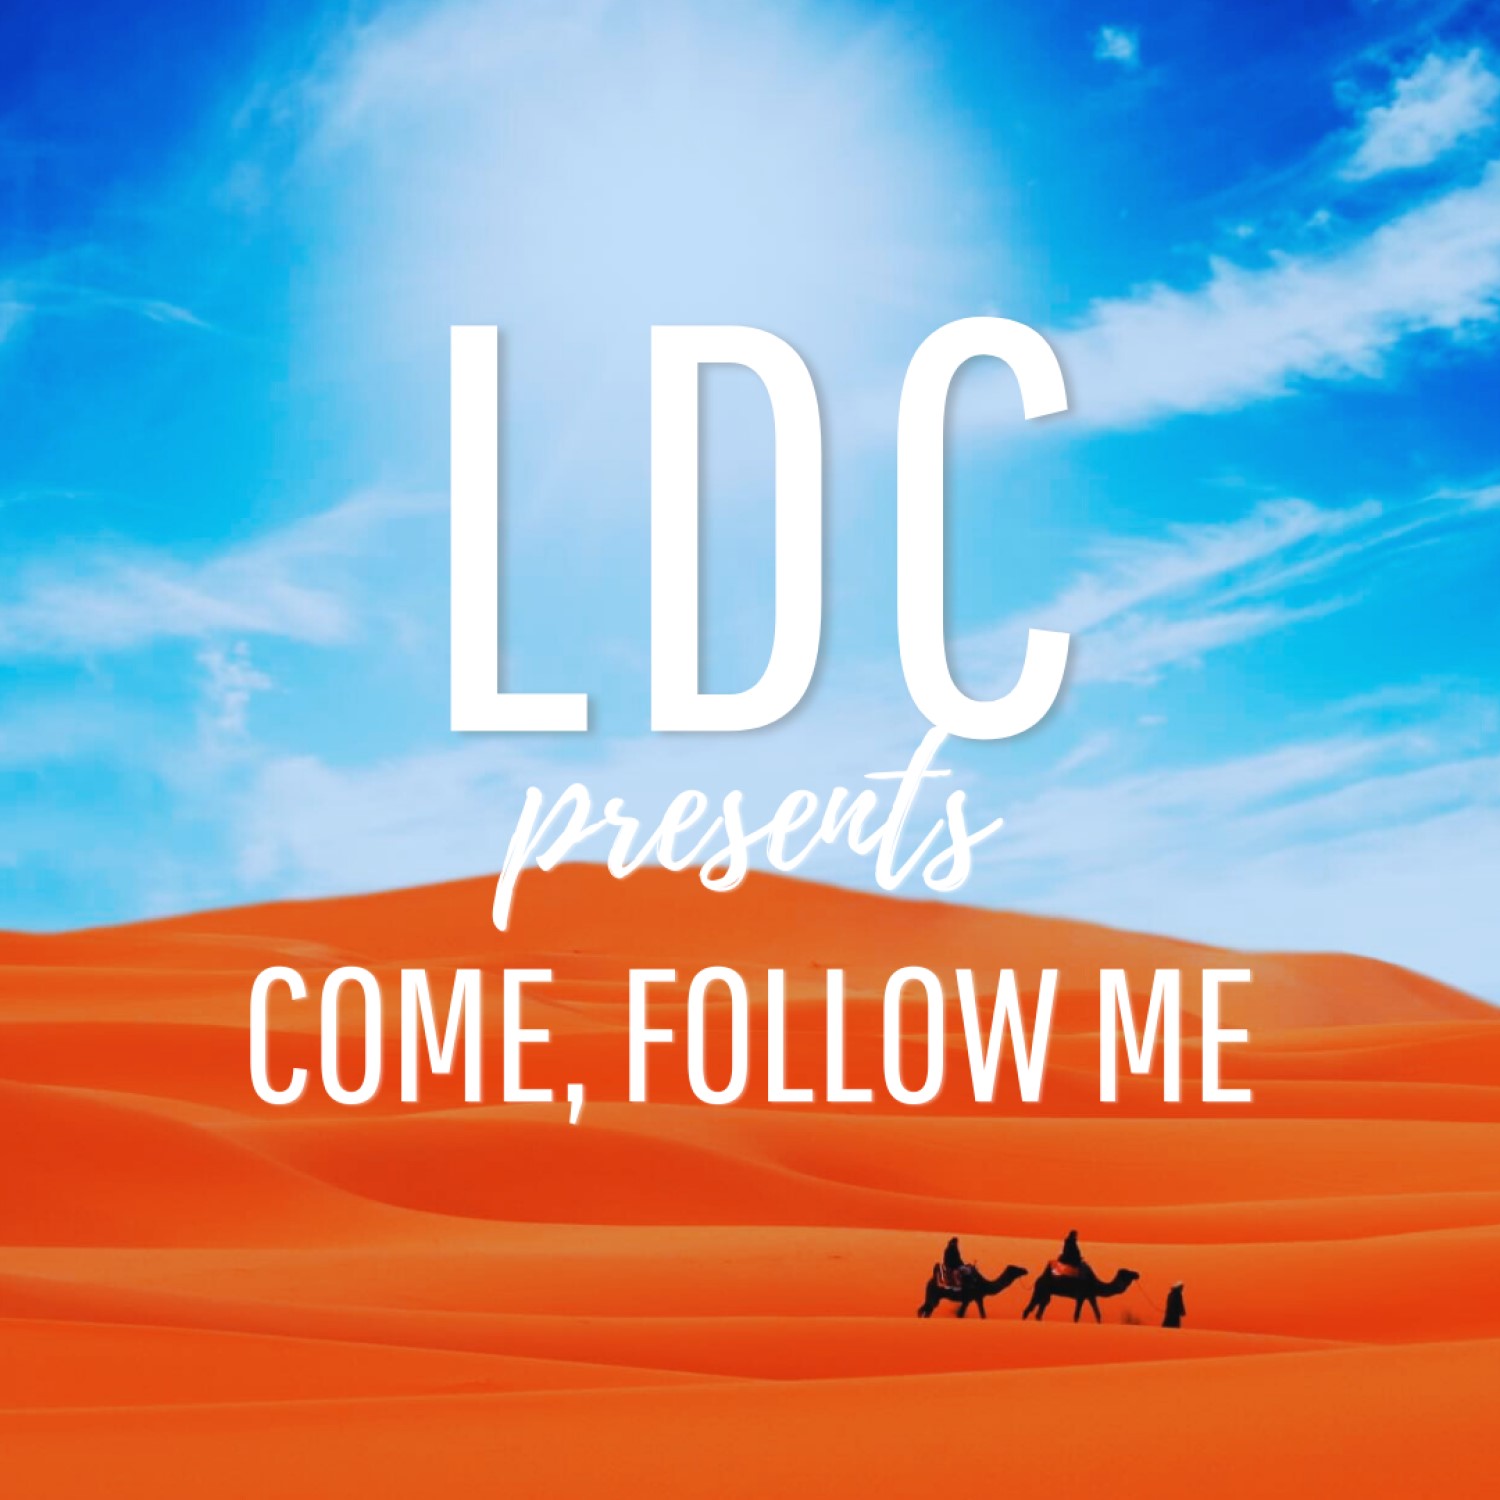 Latter-day Contemplation presents: Come, Follow me